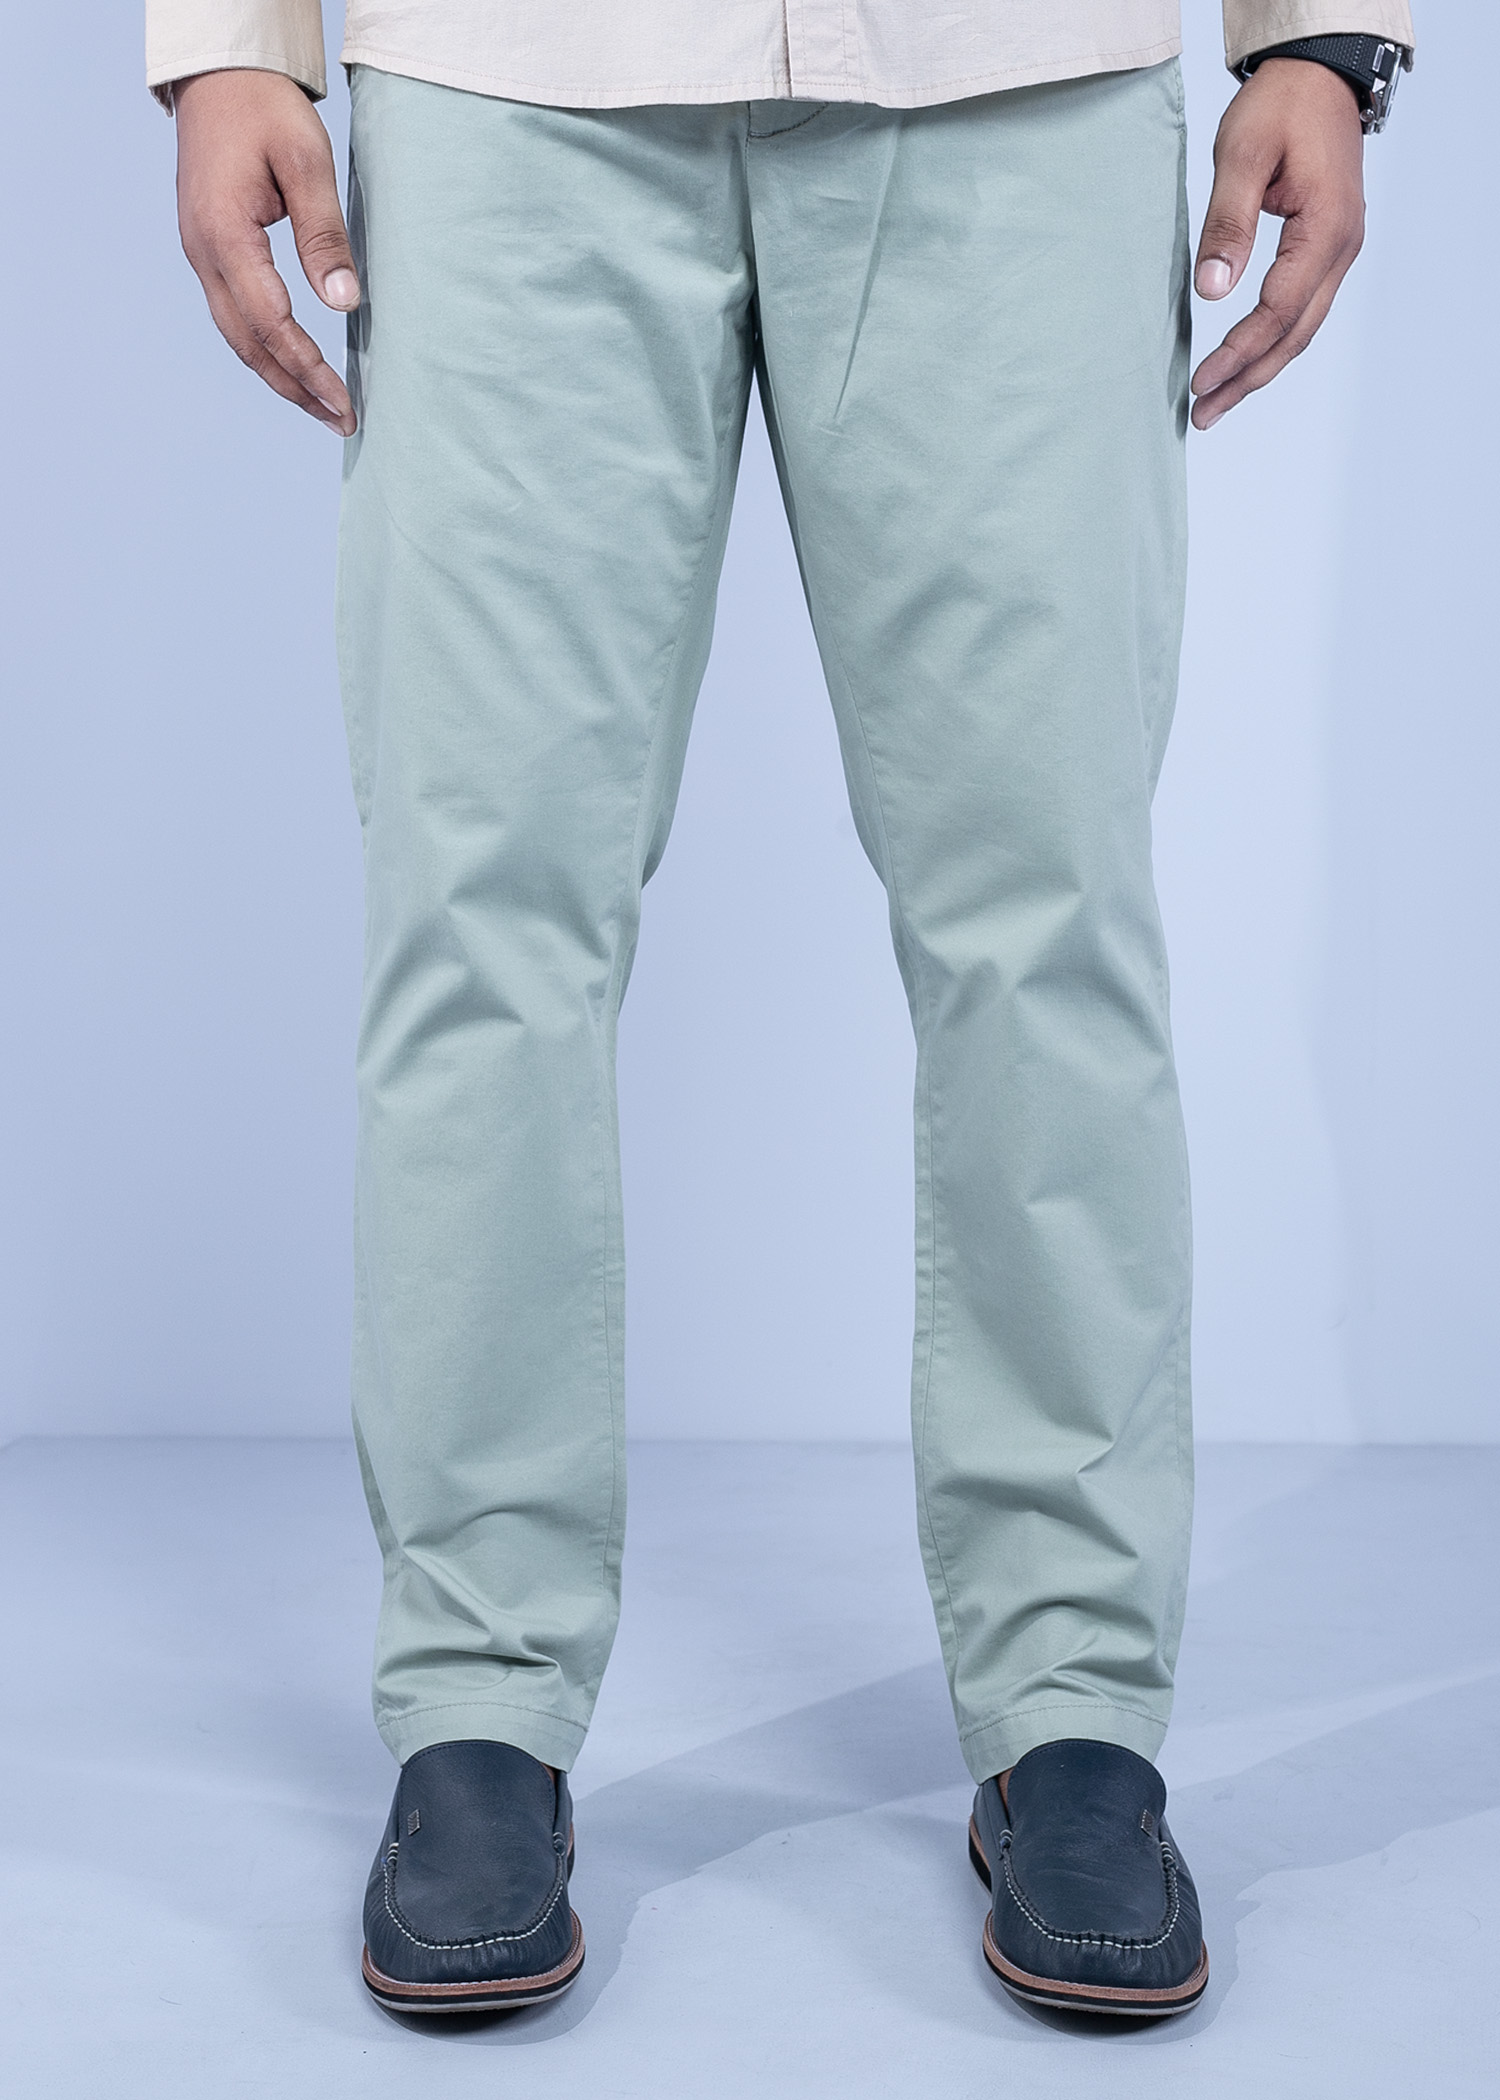 silvan chino pant paste color half front view